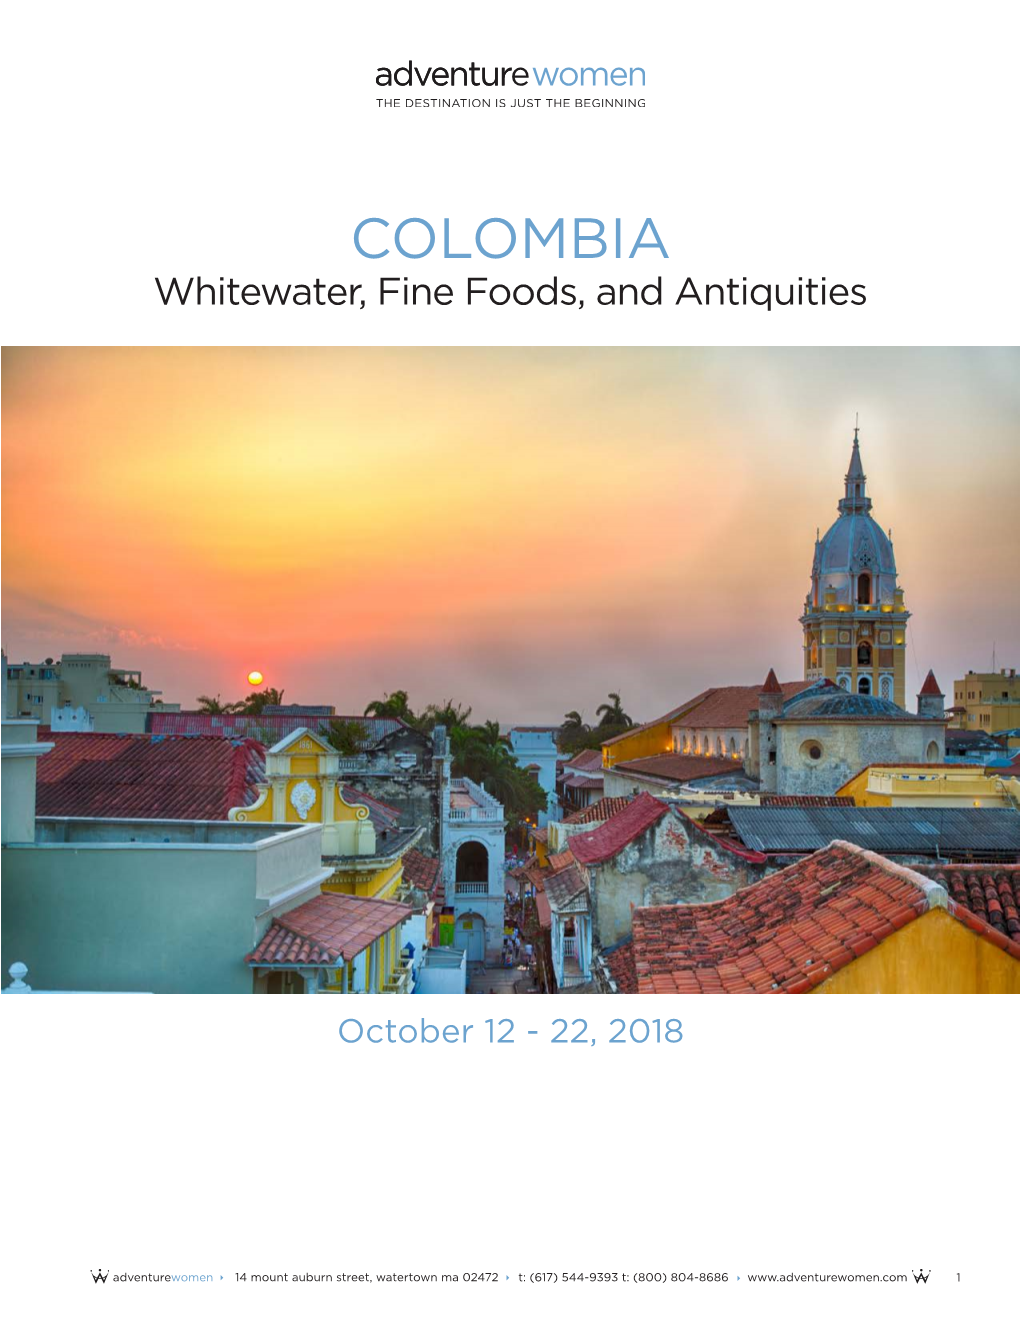 Colombia Adventure Tour for Women